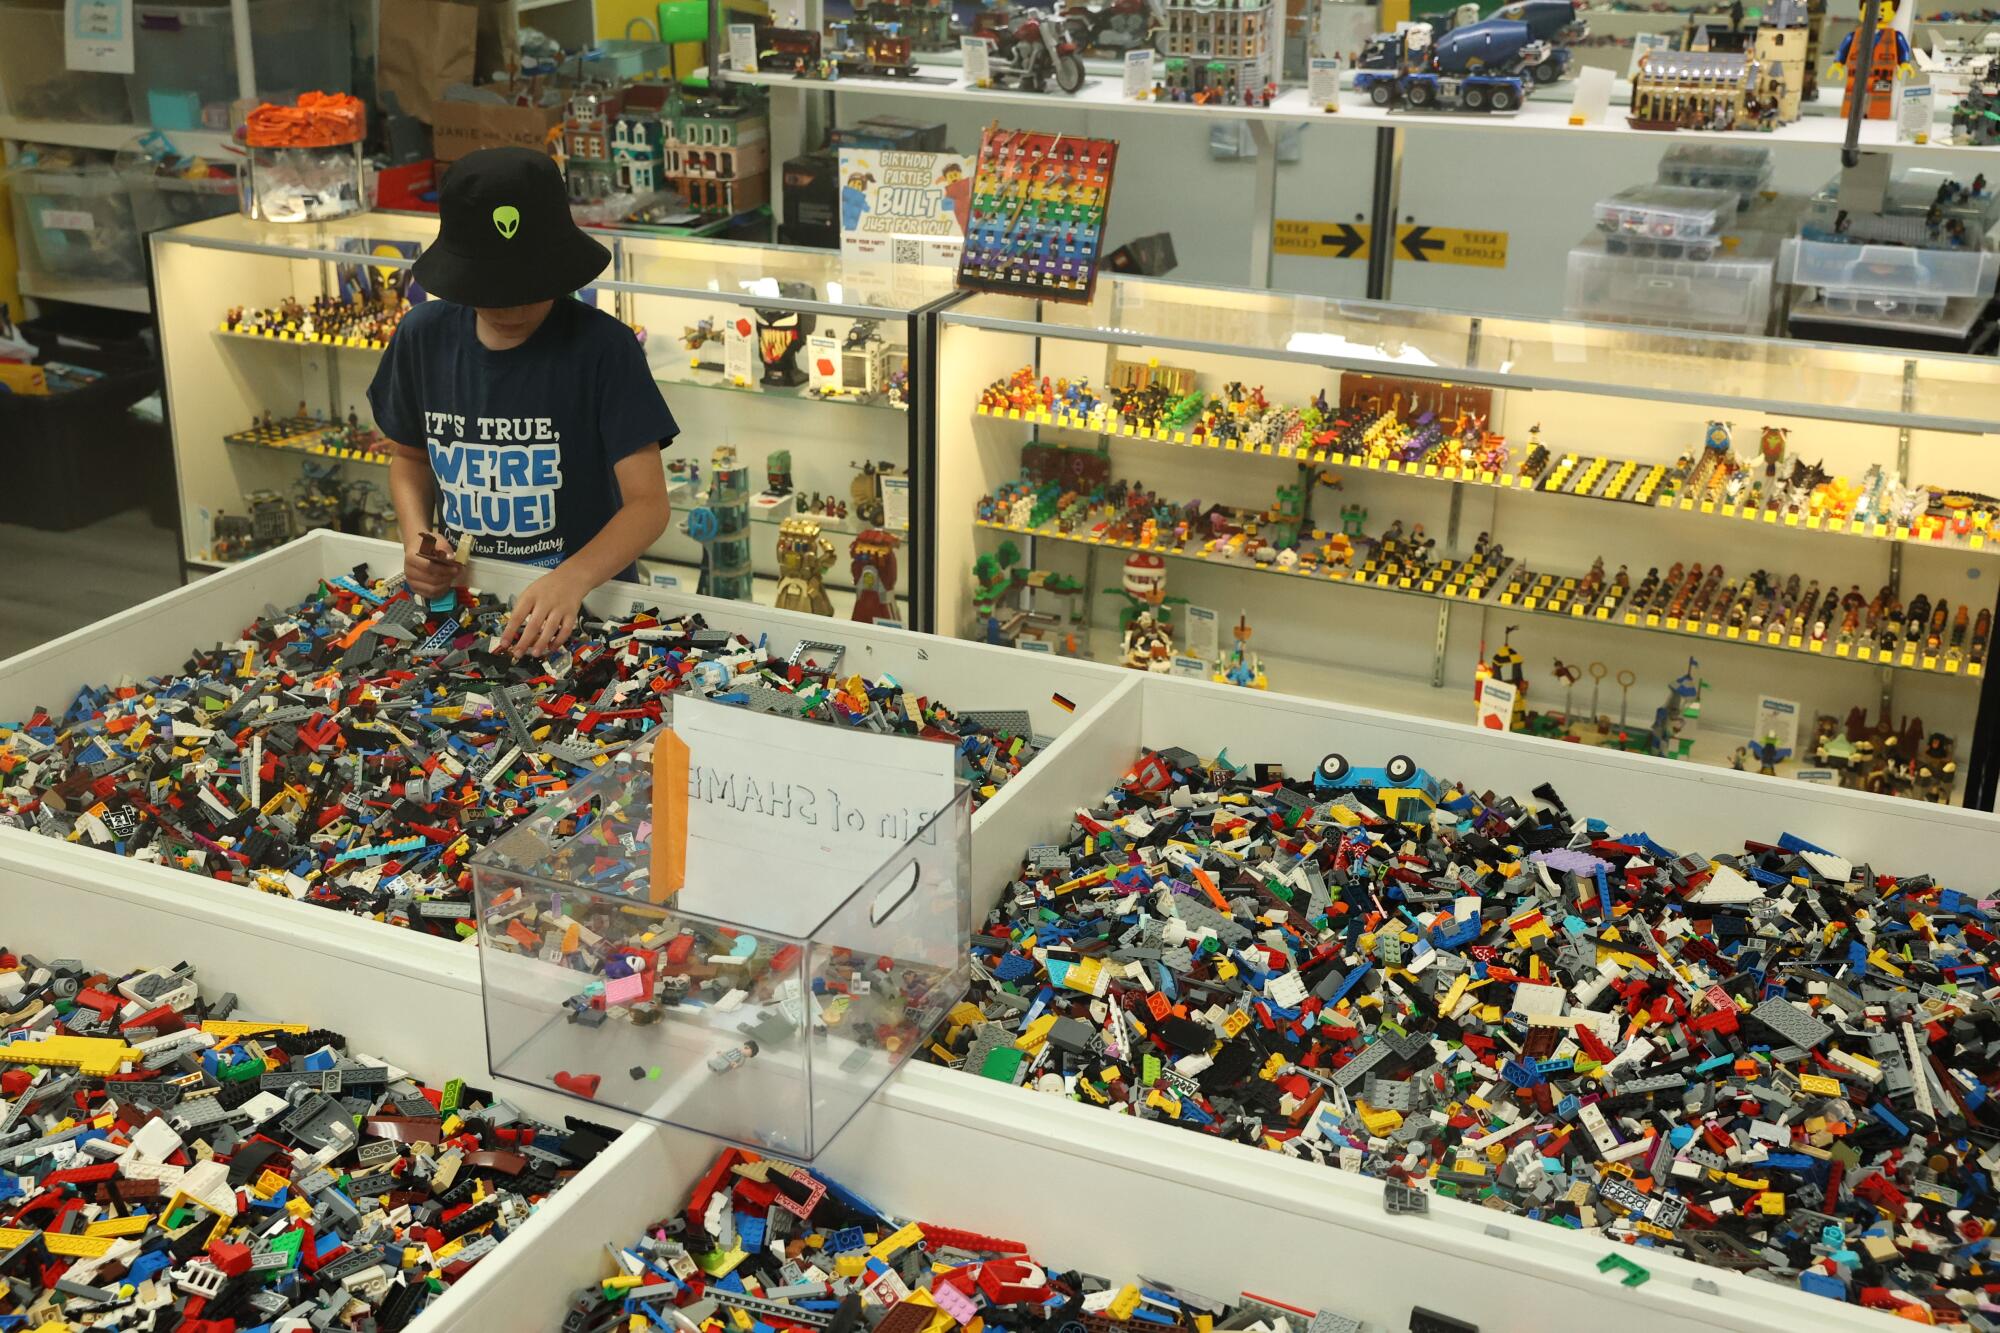 A child wearing a bucket hat browses through bins of Lego pieces near a glass display case